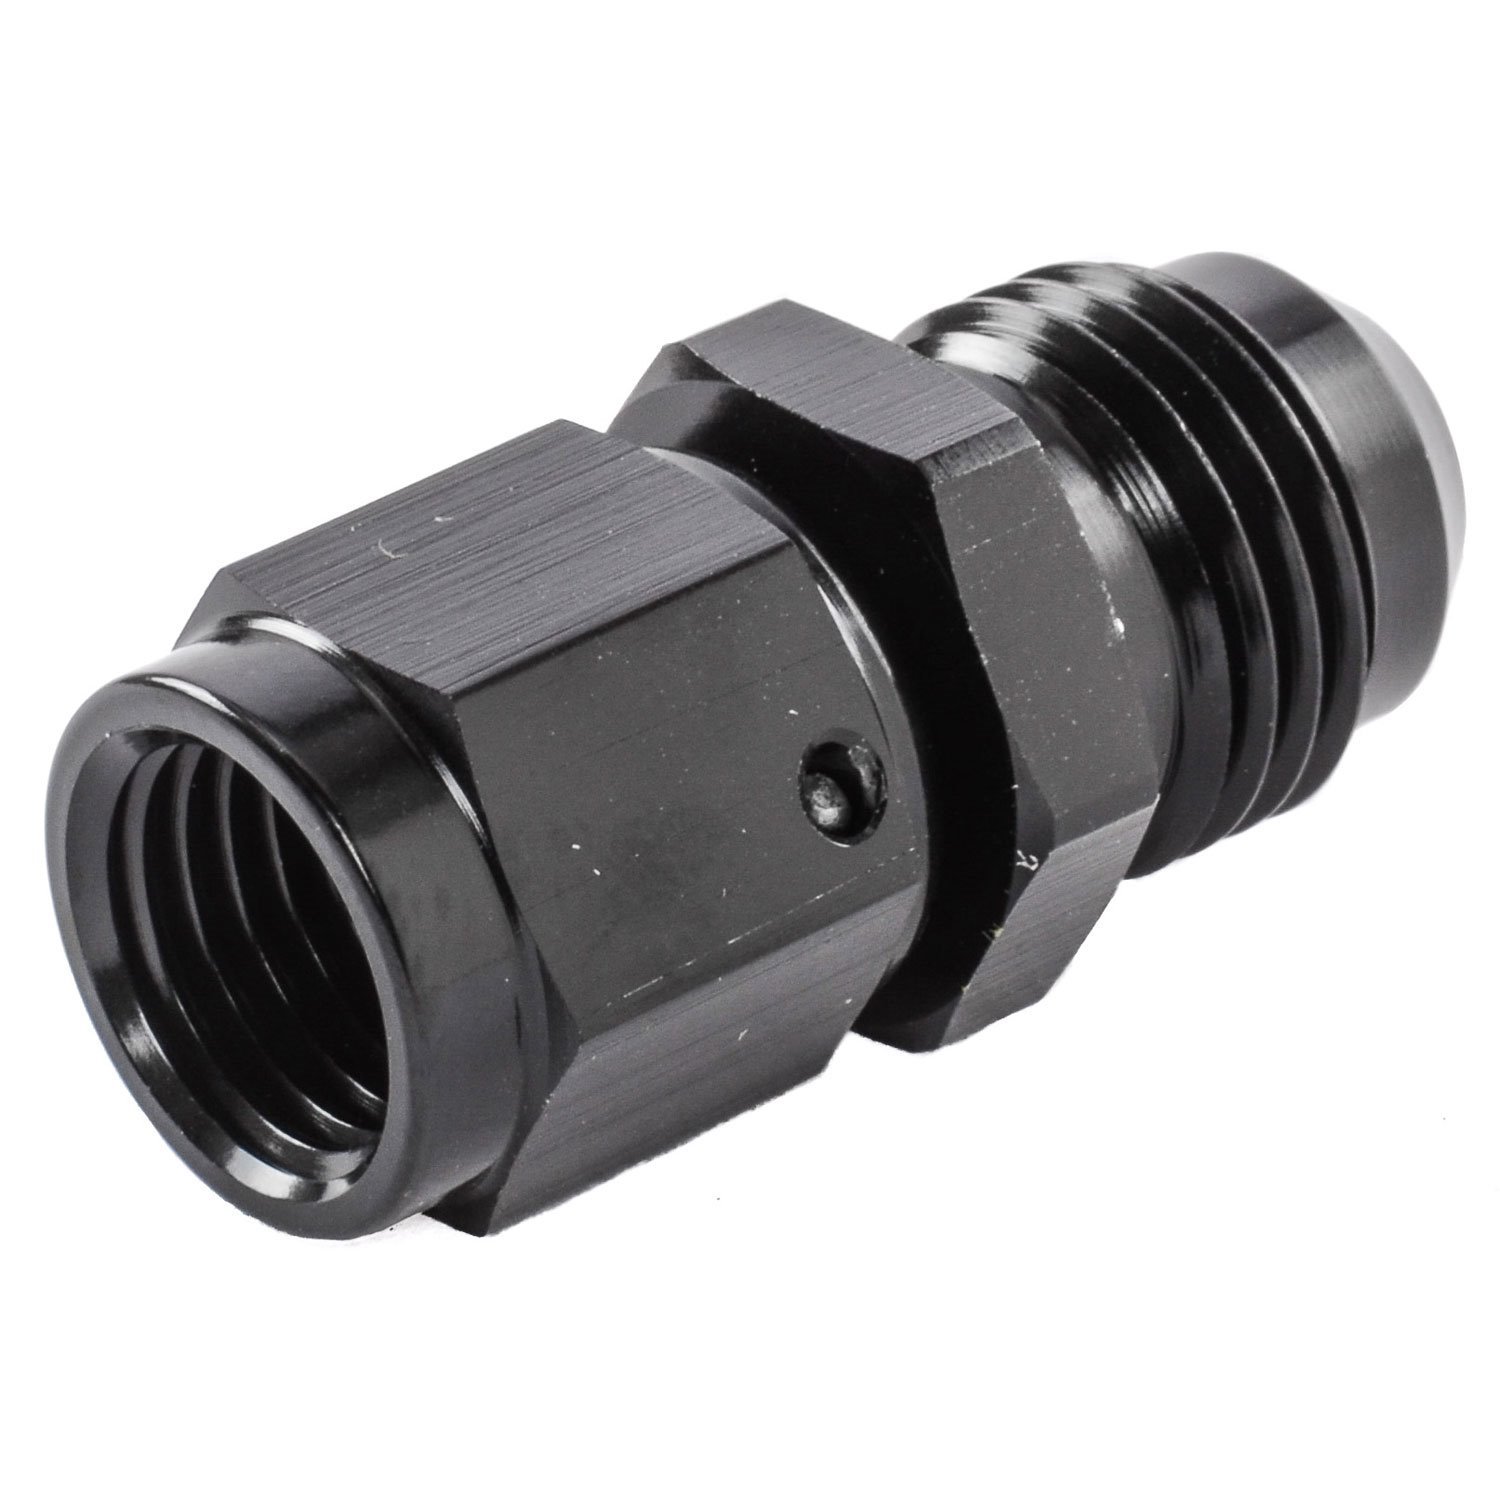 AN Female Swivel to Male Expander Fitting [-4 AN Female to -6 AN Male, Black Hard Anodized]